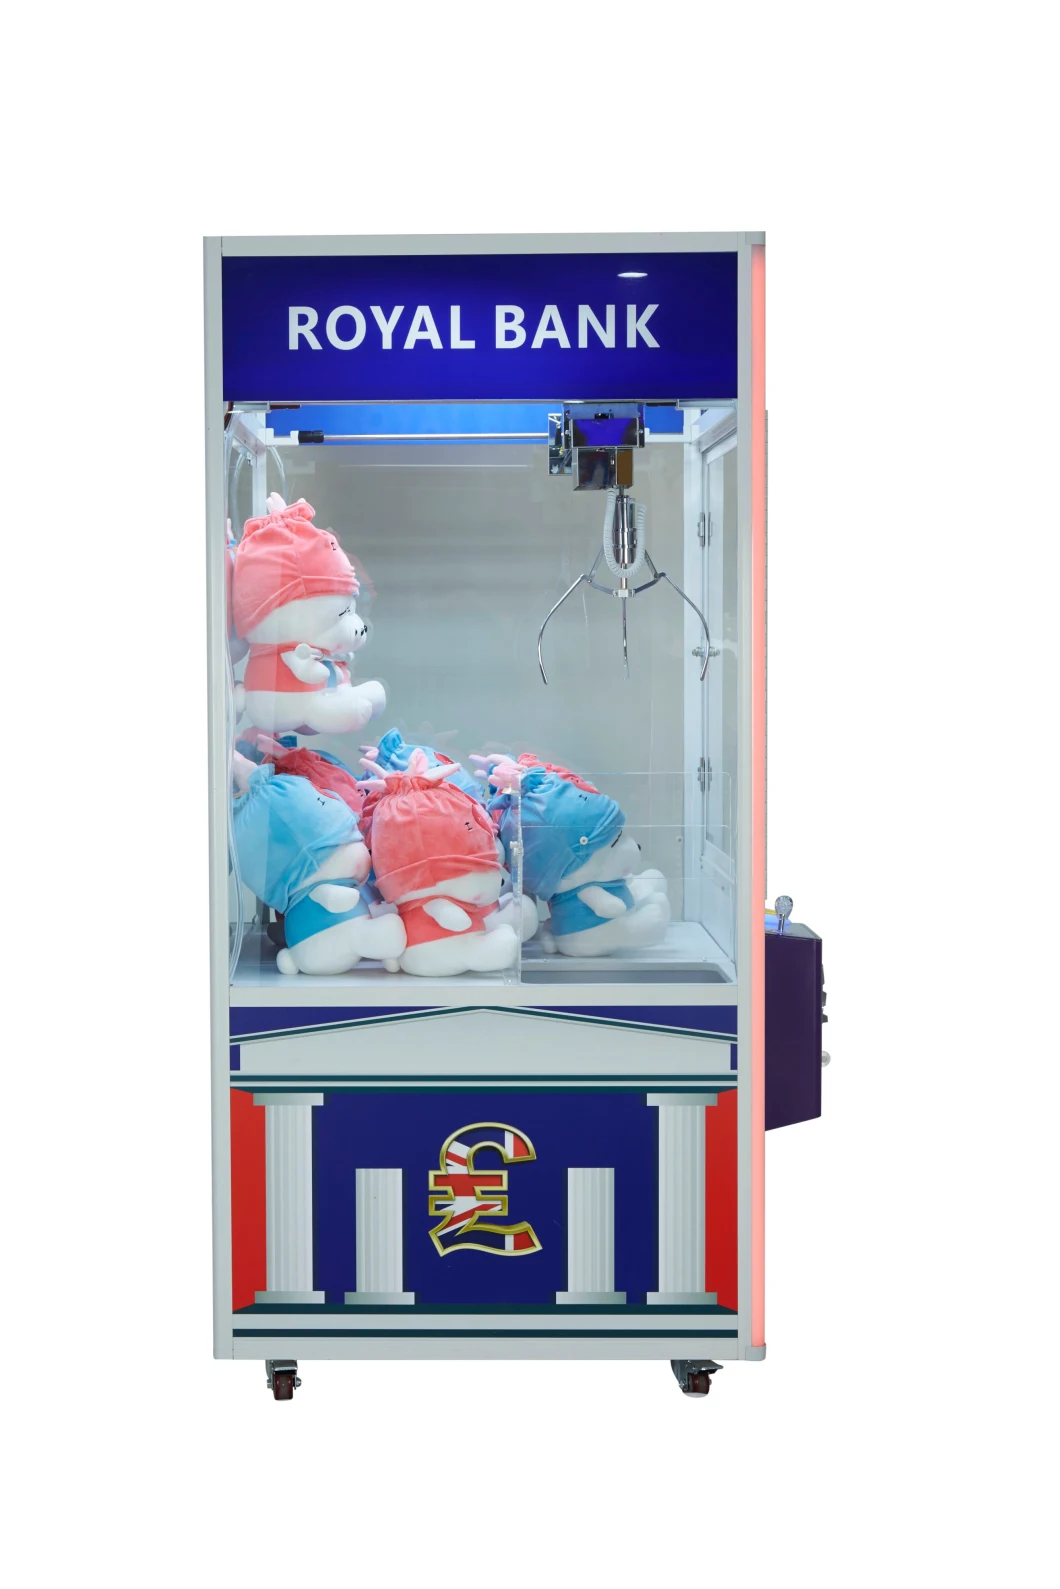 Royal Bank/Gift/Game /Claw Machine/Game Player/Arcade Game Machines/Video Game/Amusement Machine/Arcade Machine/Game Machine